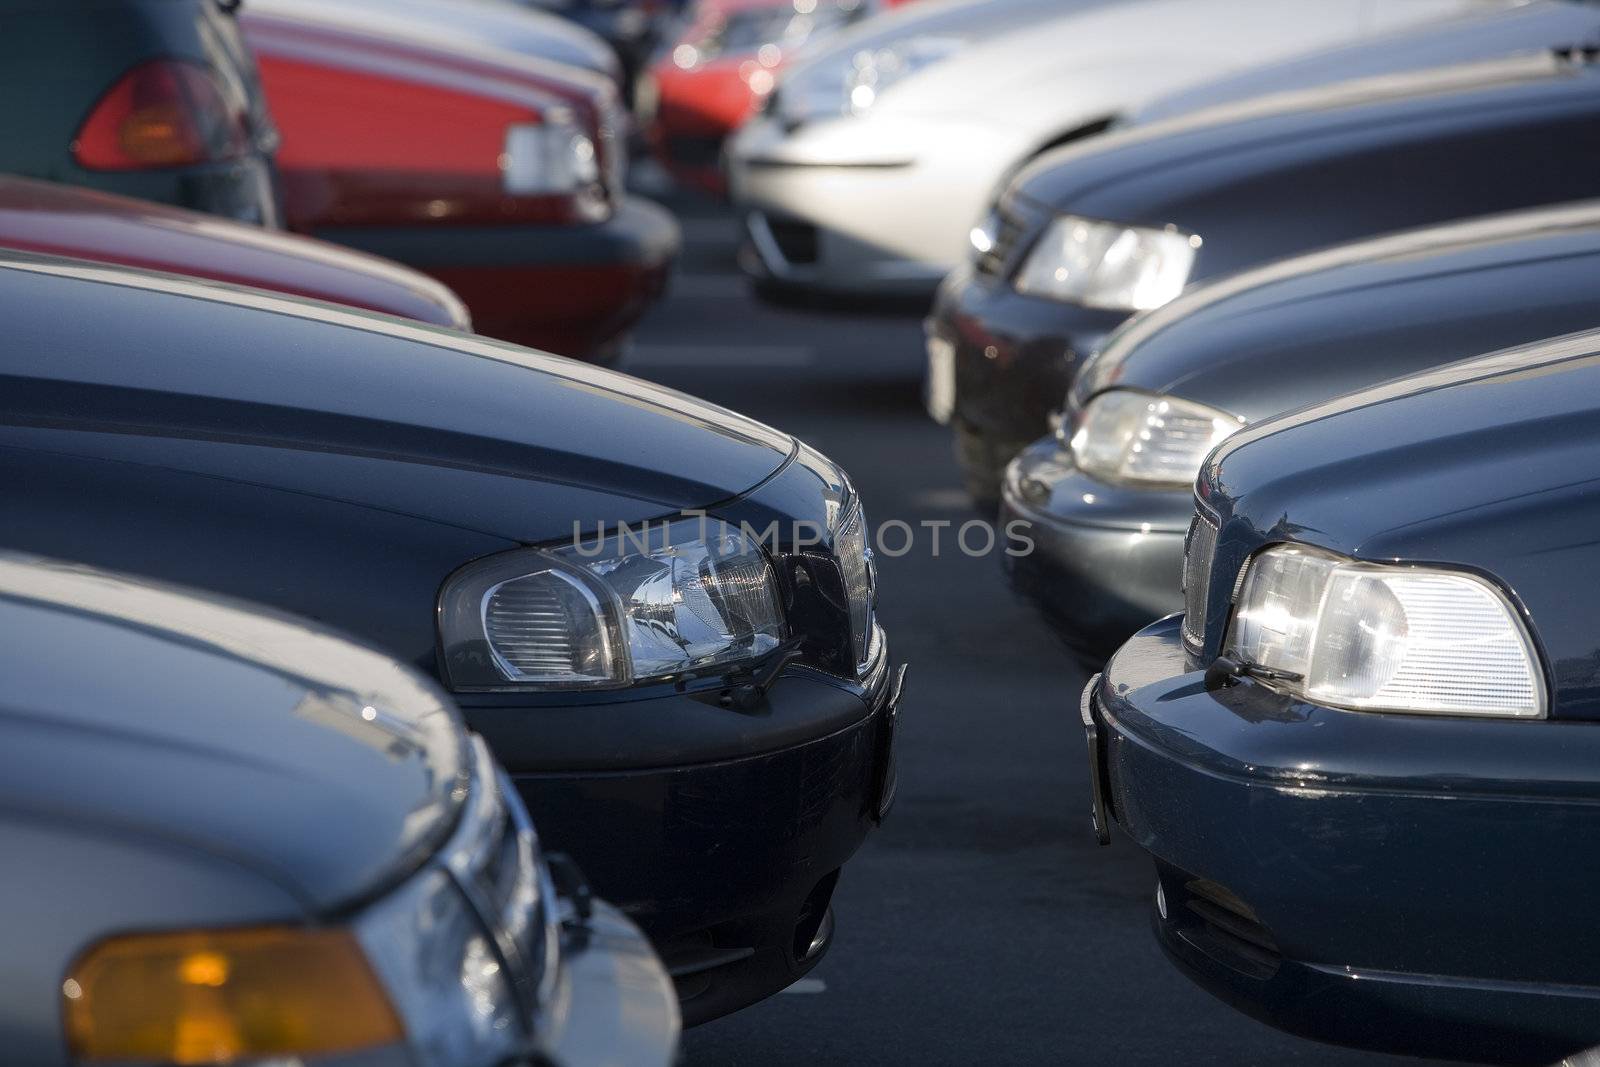 Large group of Parked Cars in a row